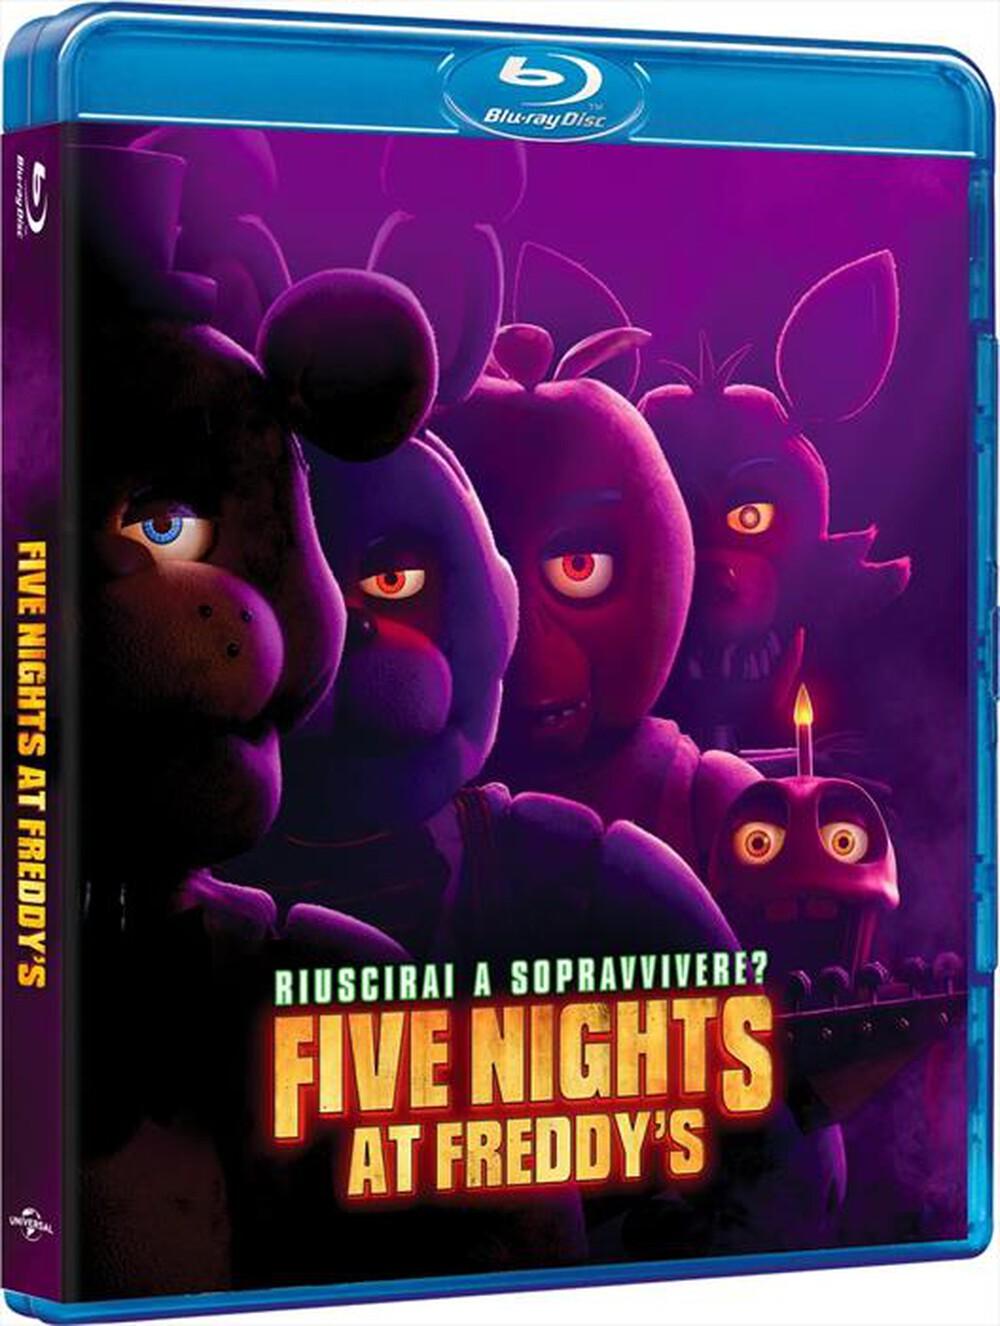 "UNIVERSAL PICTURES - Five Nights At Freddy'S"